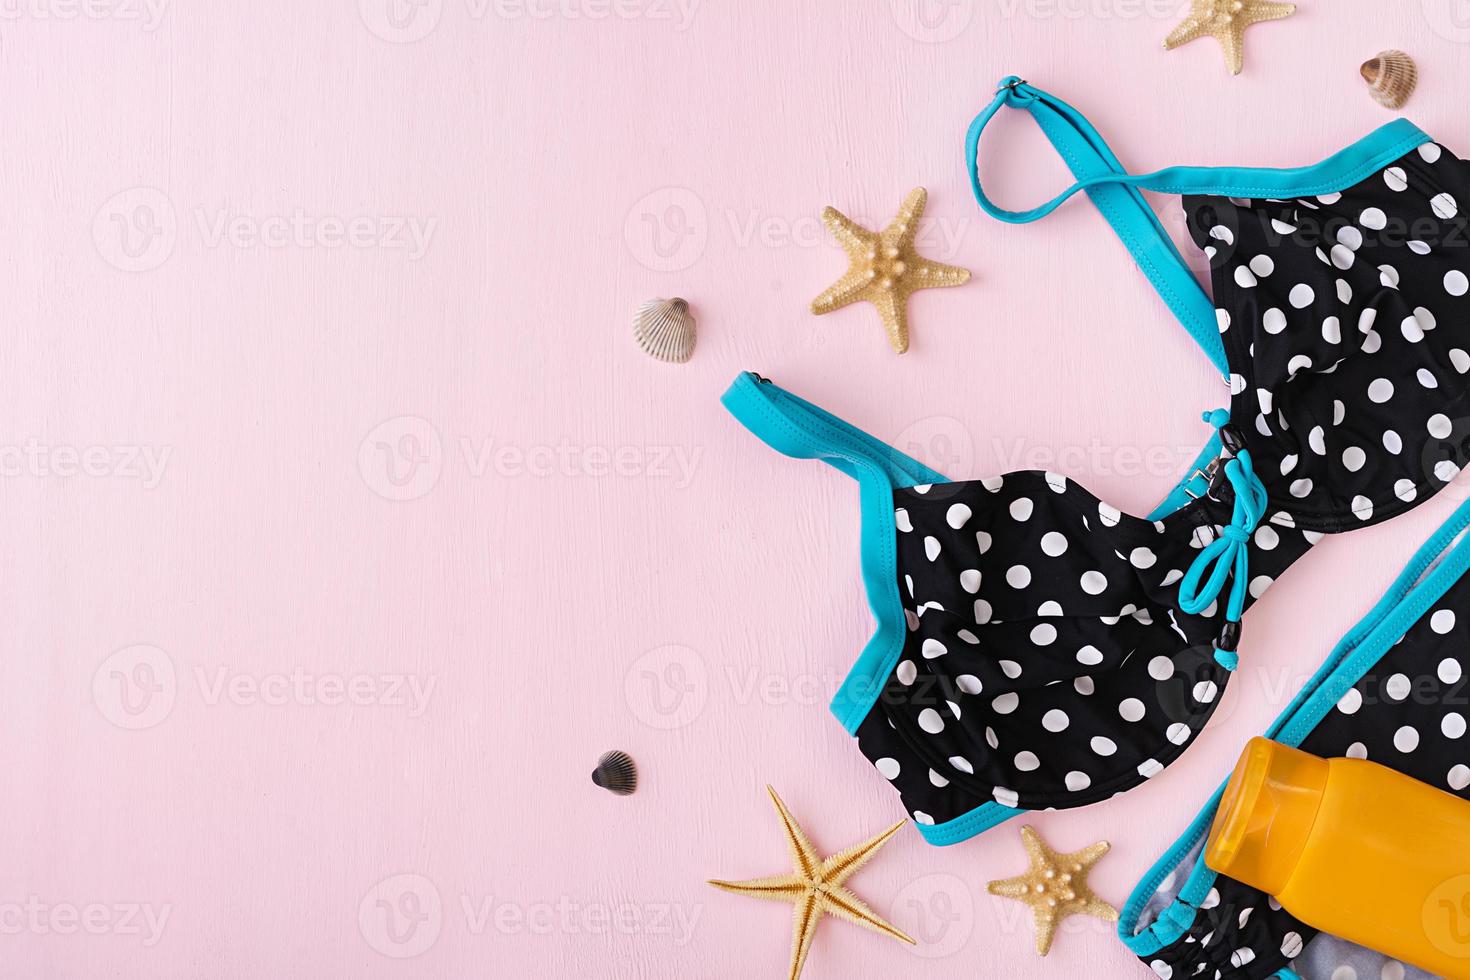 Swimsuit with different seashells and starfish on pink background. Top view photo